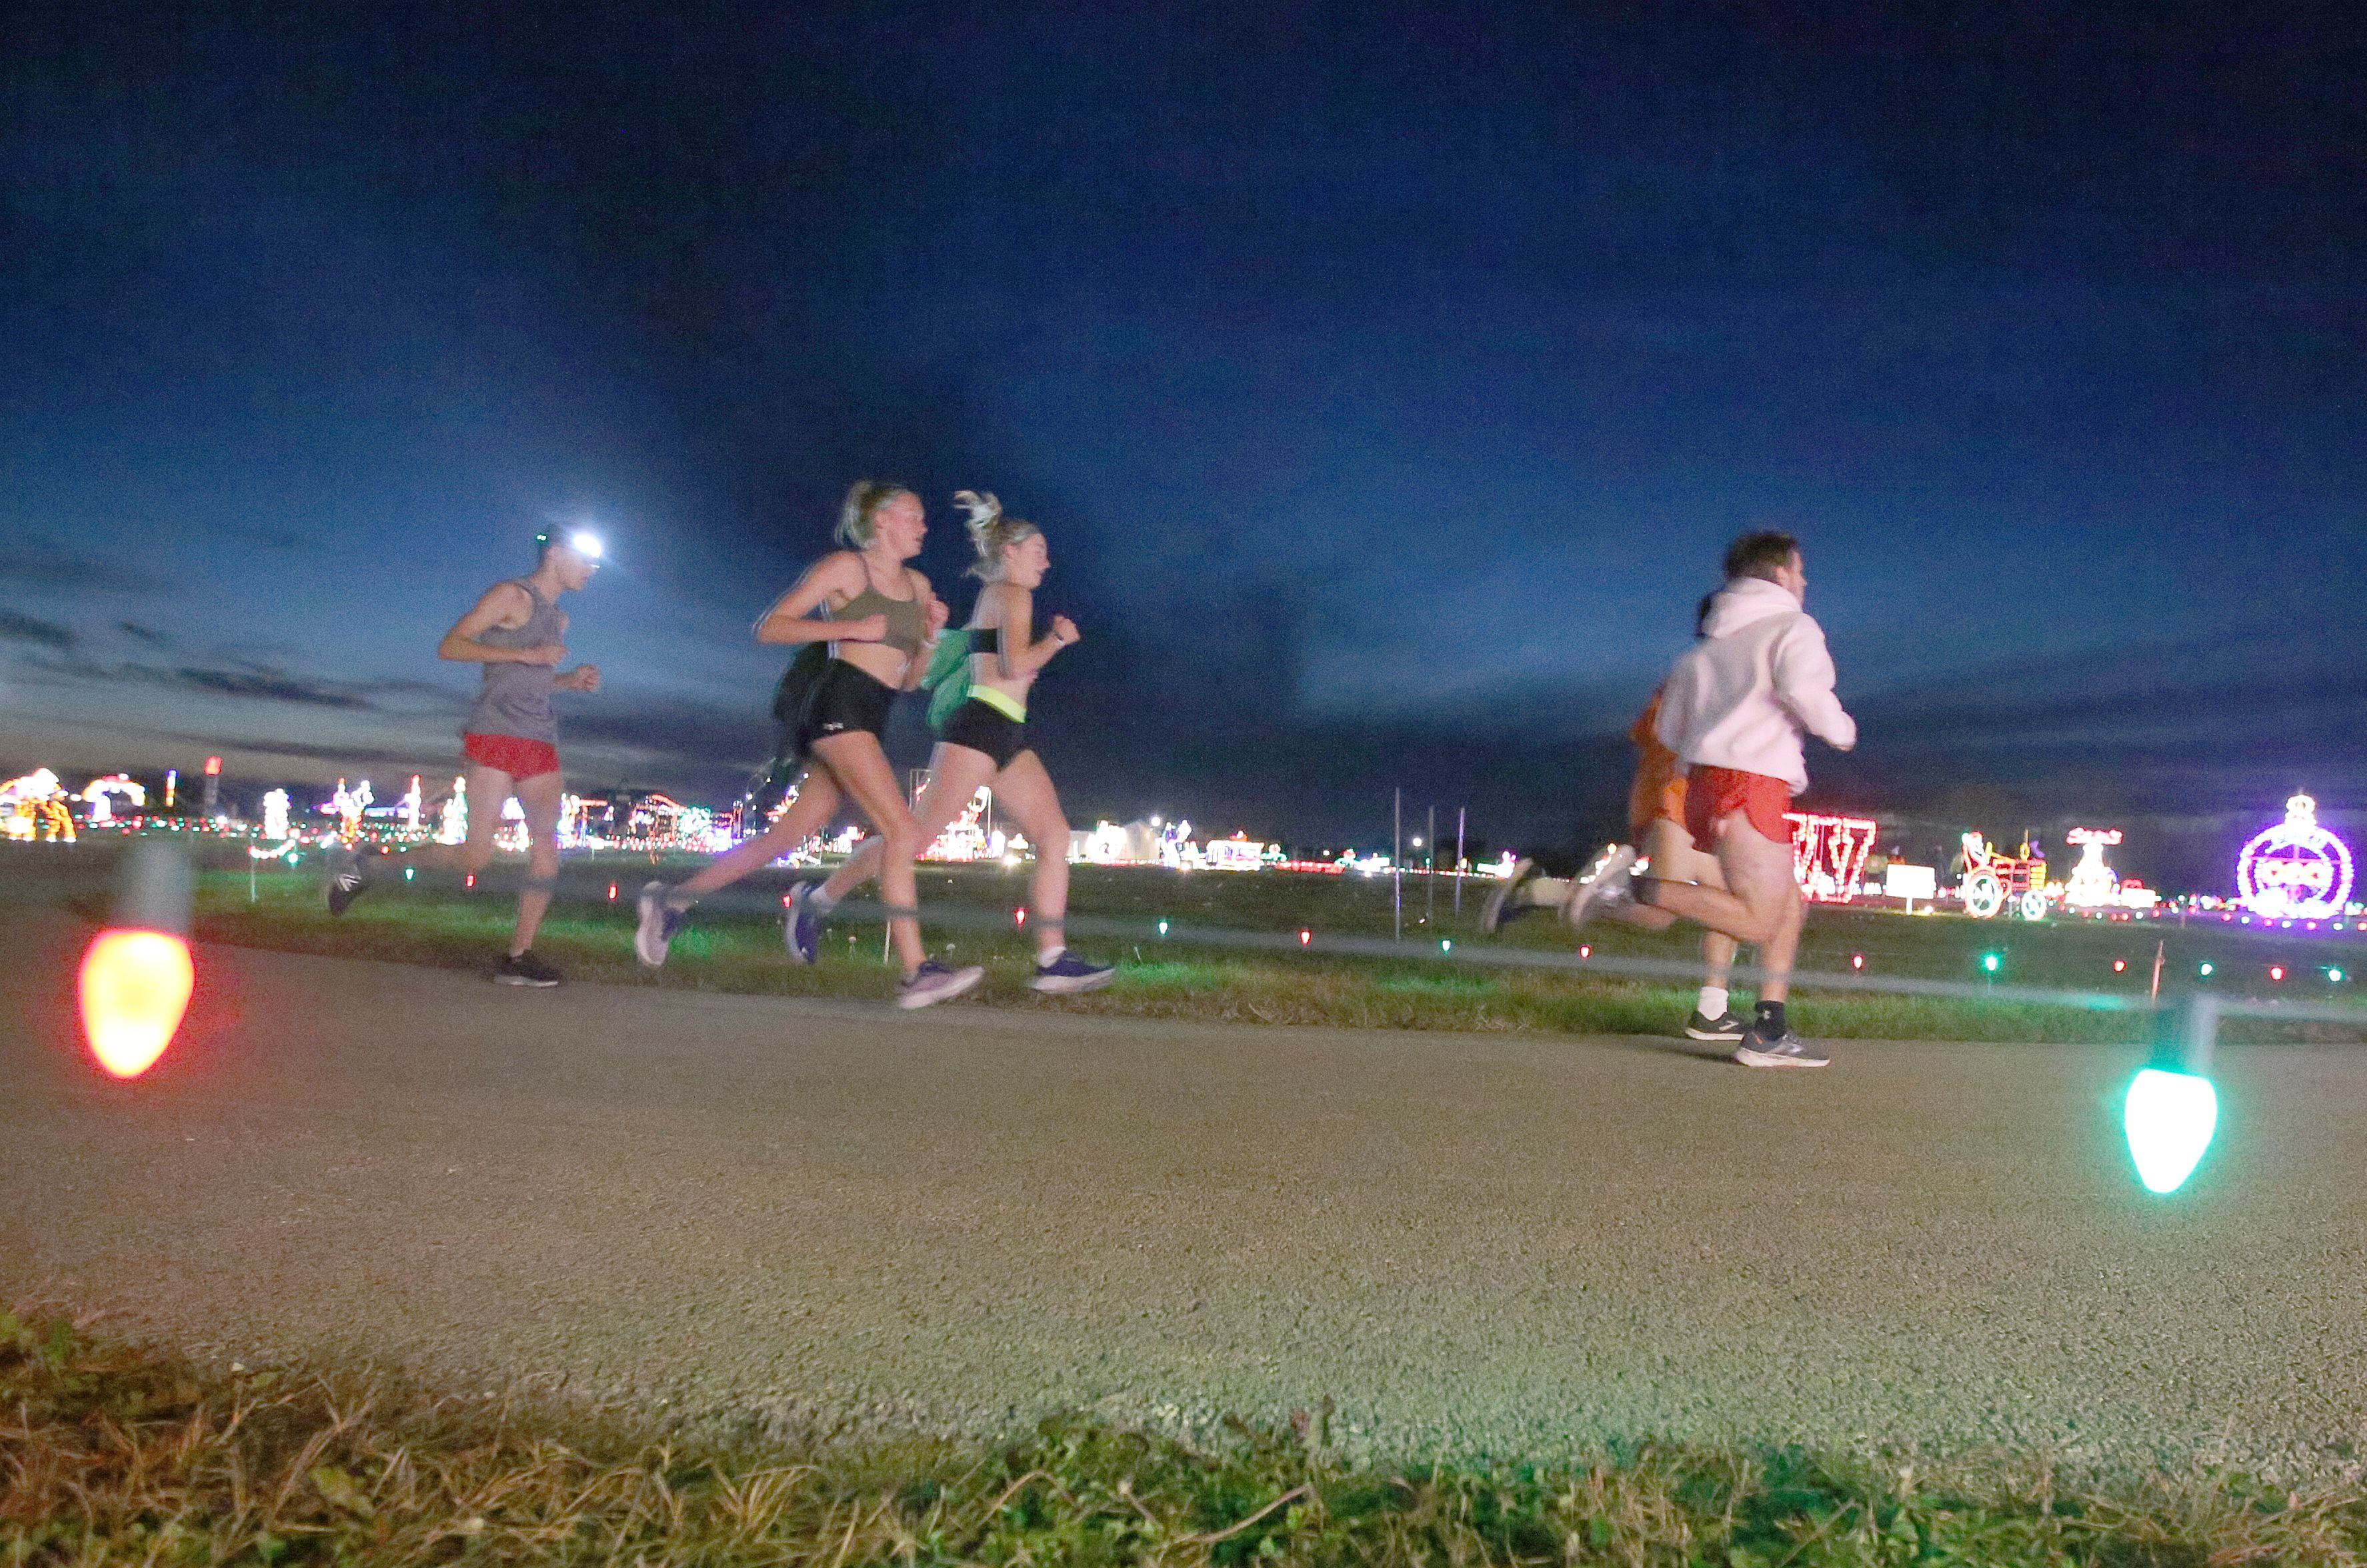 Runners turn a corner during the Run Run Rudolph 5K Fun Run on Sunday, Nov. 5, 2023 at Rotary Park in La Salle. The Celebration Of Lights is the area’s largest drive-thru Christmas light display, stretching throughout Rotary Park on the east side of La Salle.